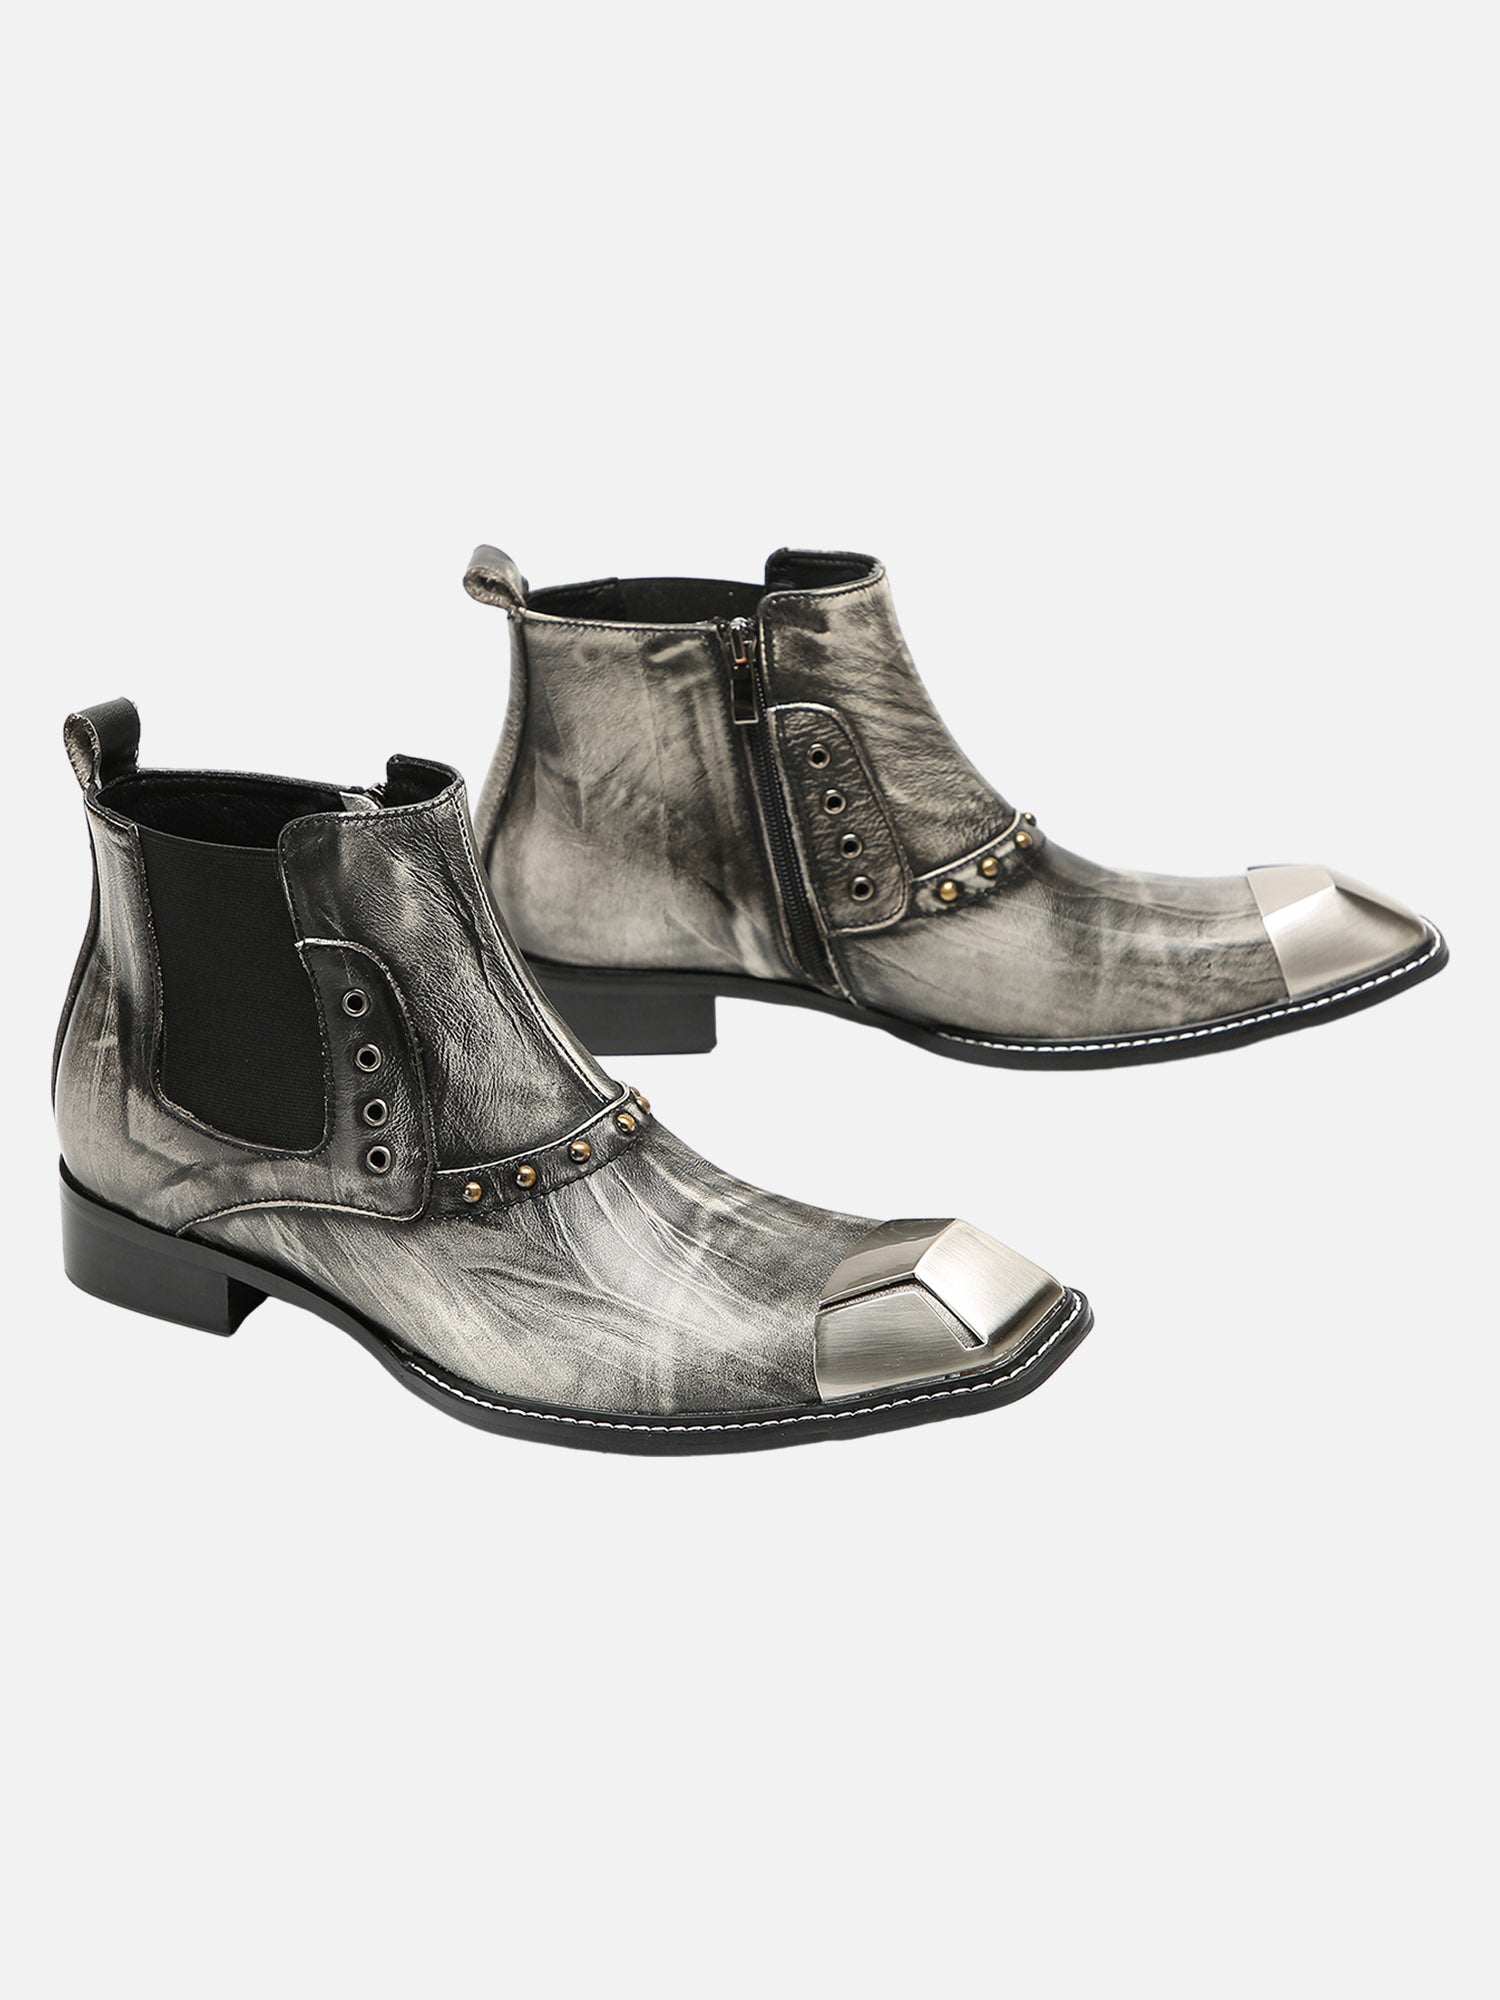 Cowhide Square Toe British Bbrogue Engraved Chelsea Boots